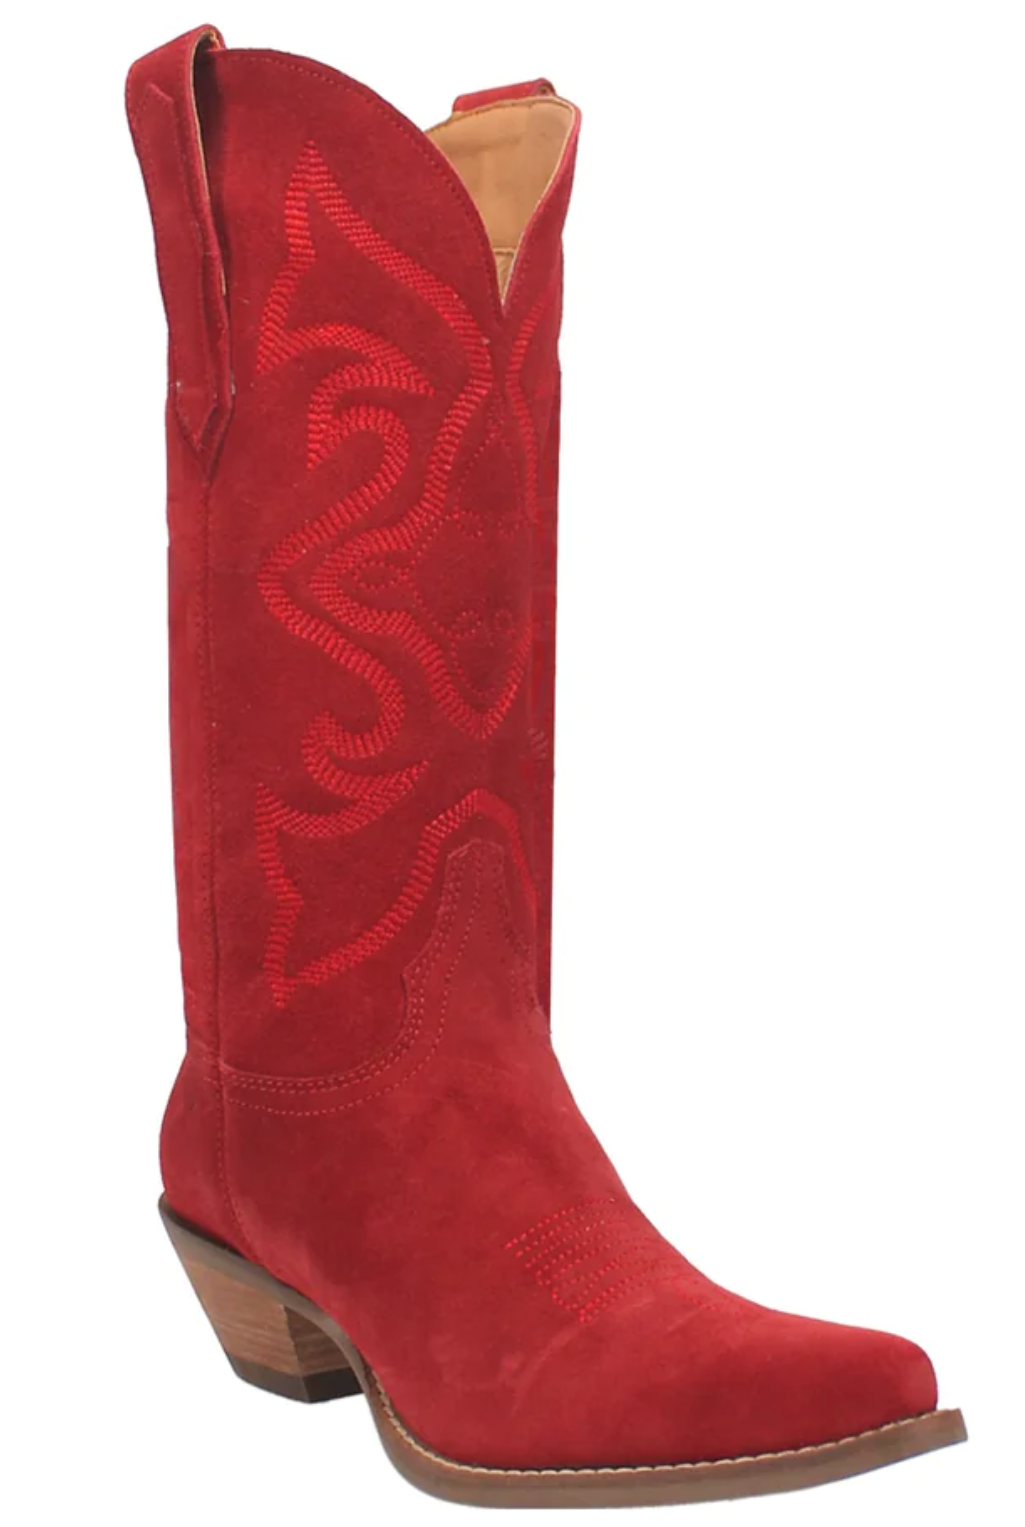 Out West Boot - Red